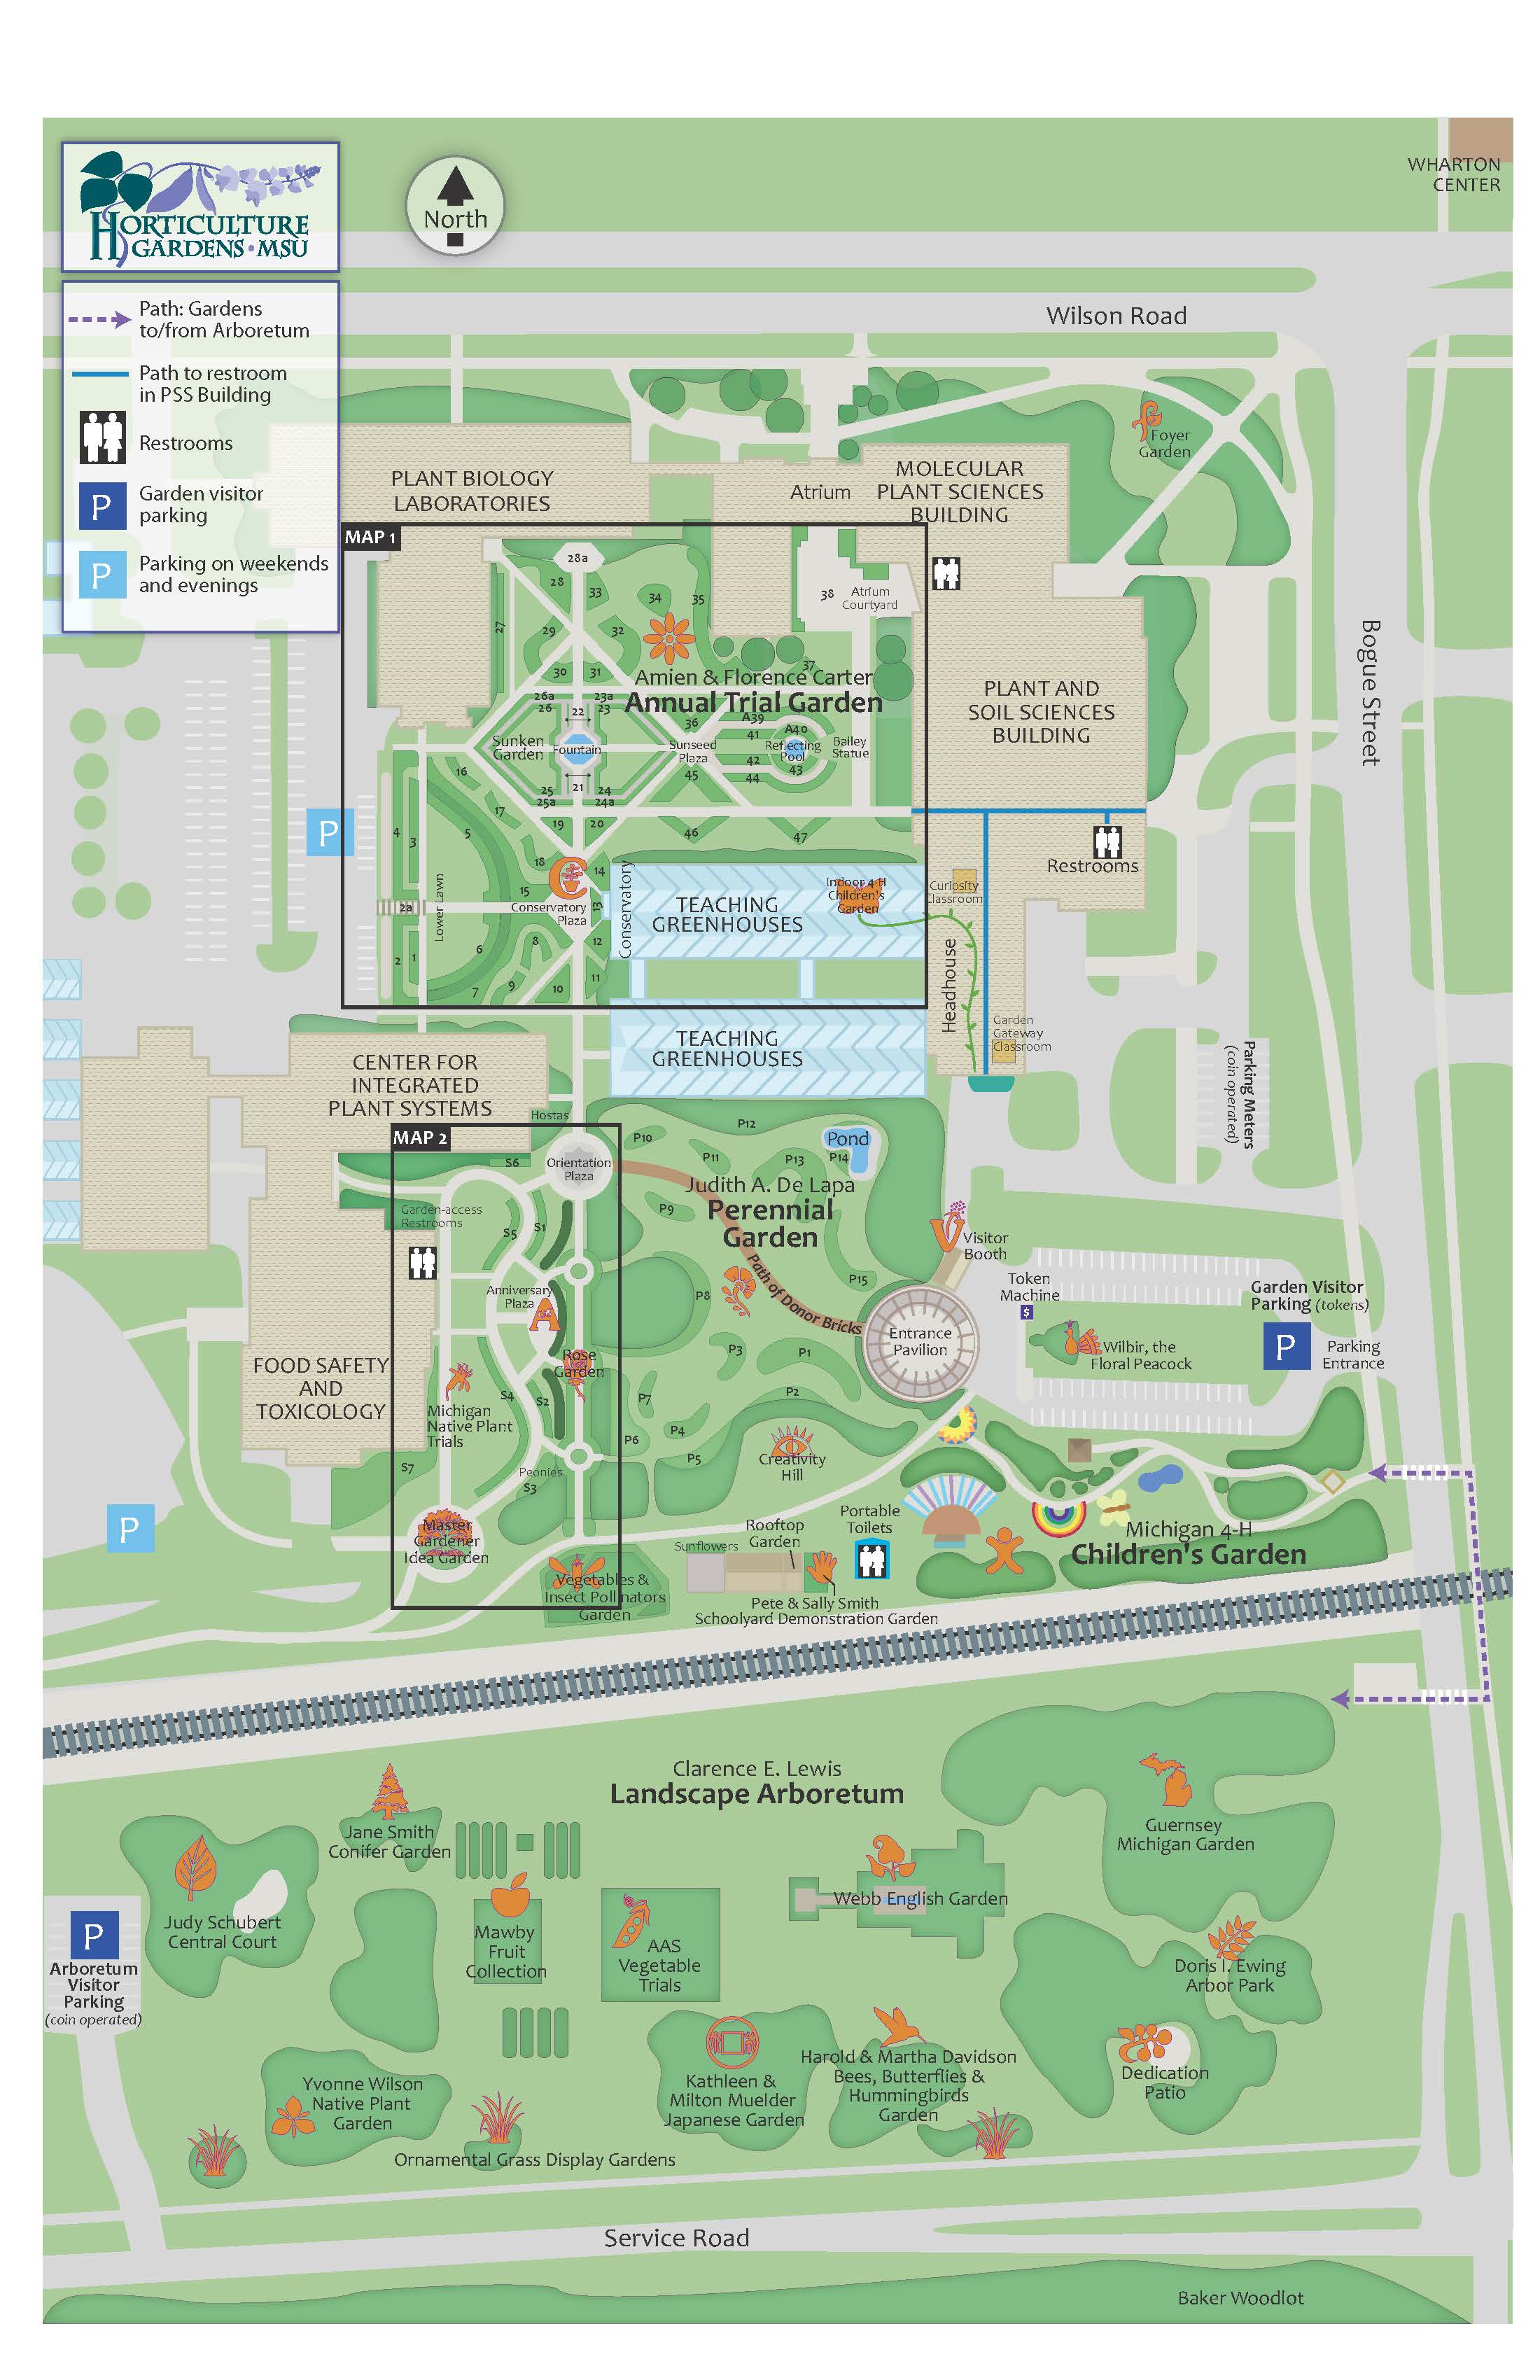 Map of the Gardens